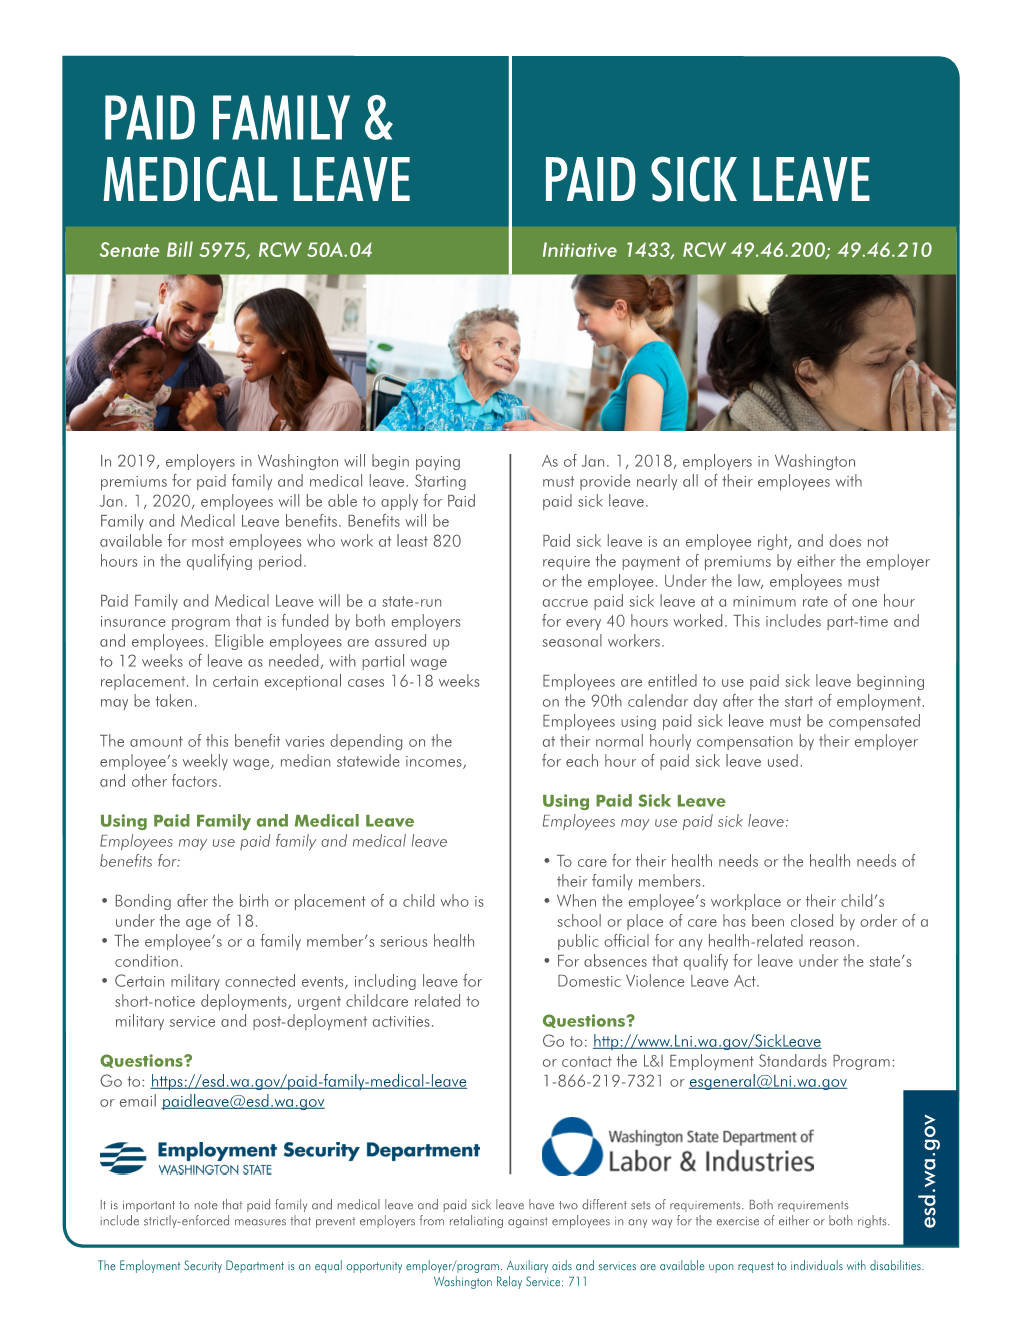 Paid Family & Medical Leave Paid Sick Leave